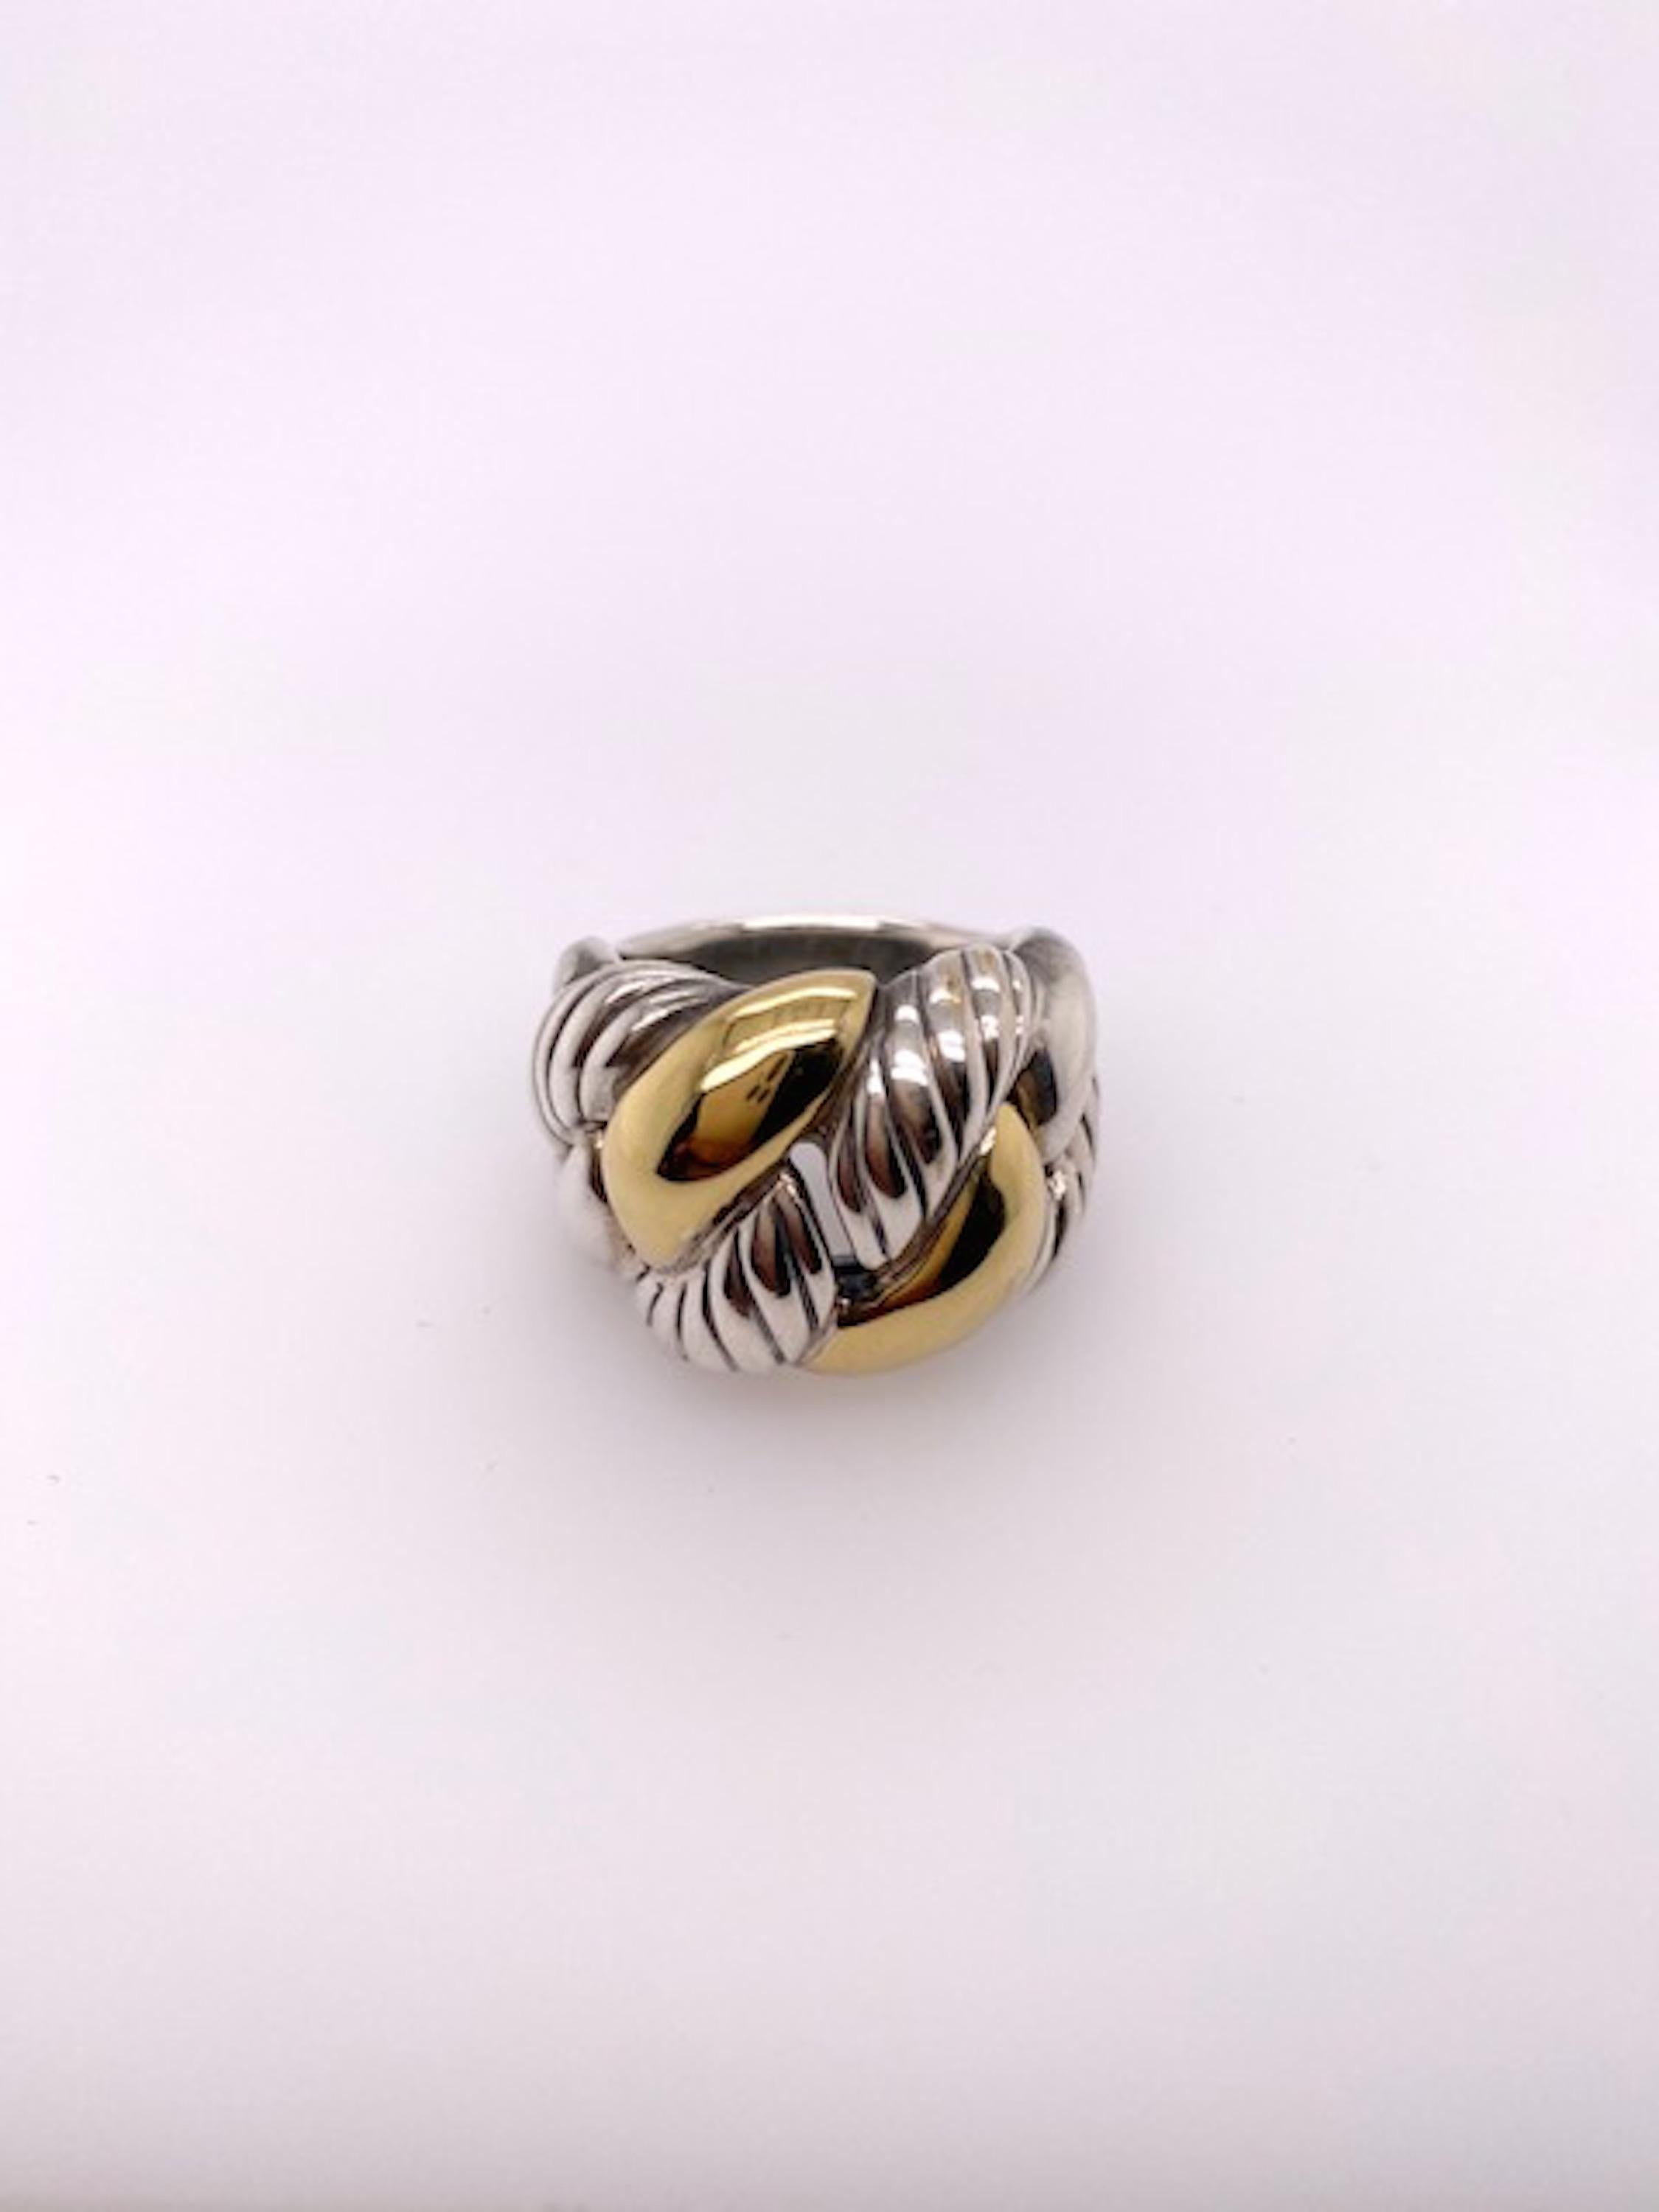 Large crossover ring.  Made and signed by David Yurman. Interlocking circles of heavy gauge sterling silver and 18K yellow gold.  Size 8 and can be custom-sized. The top of the ring measures approximately 1 1/4